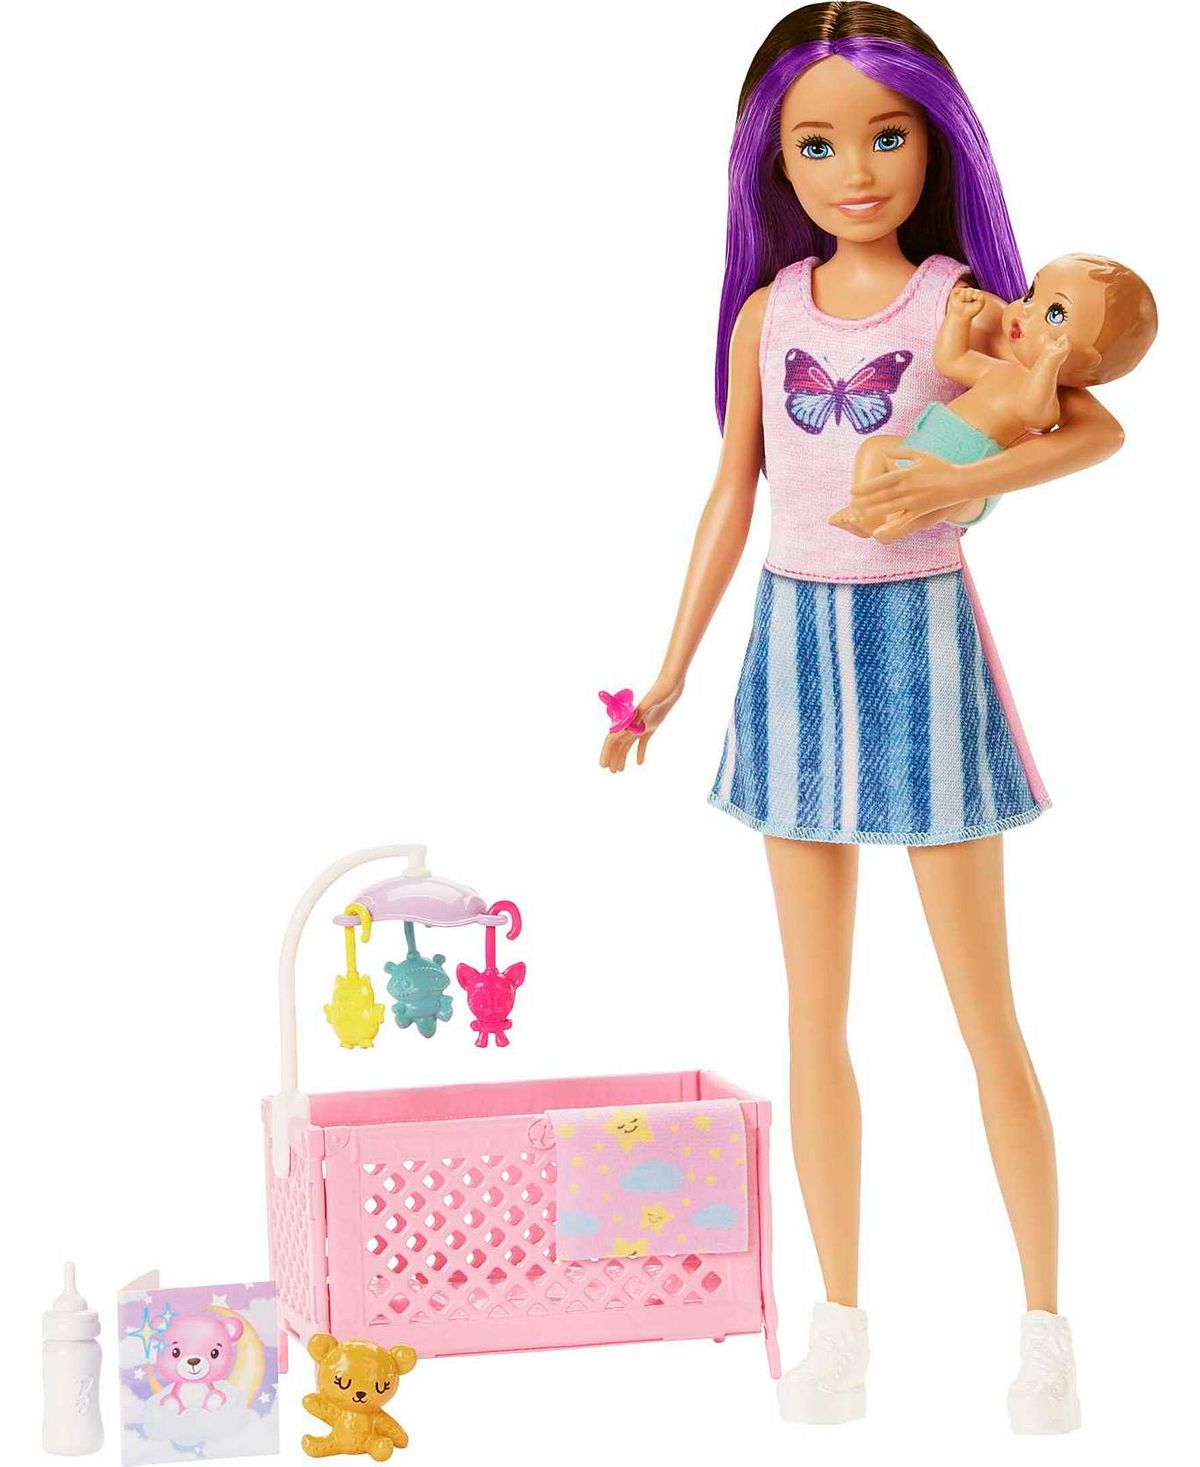 Barbie Skipper Babysitters Inc. Doll and Playset - Bedtime Adventure